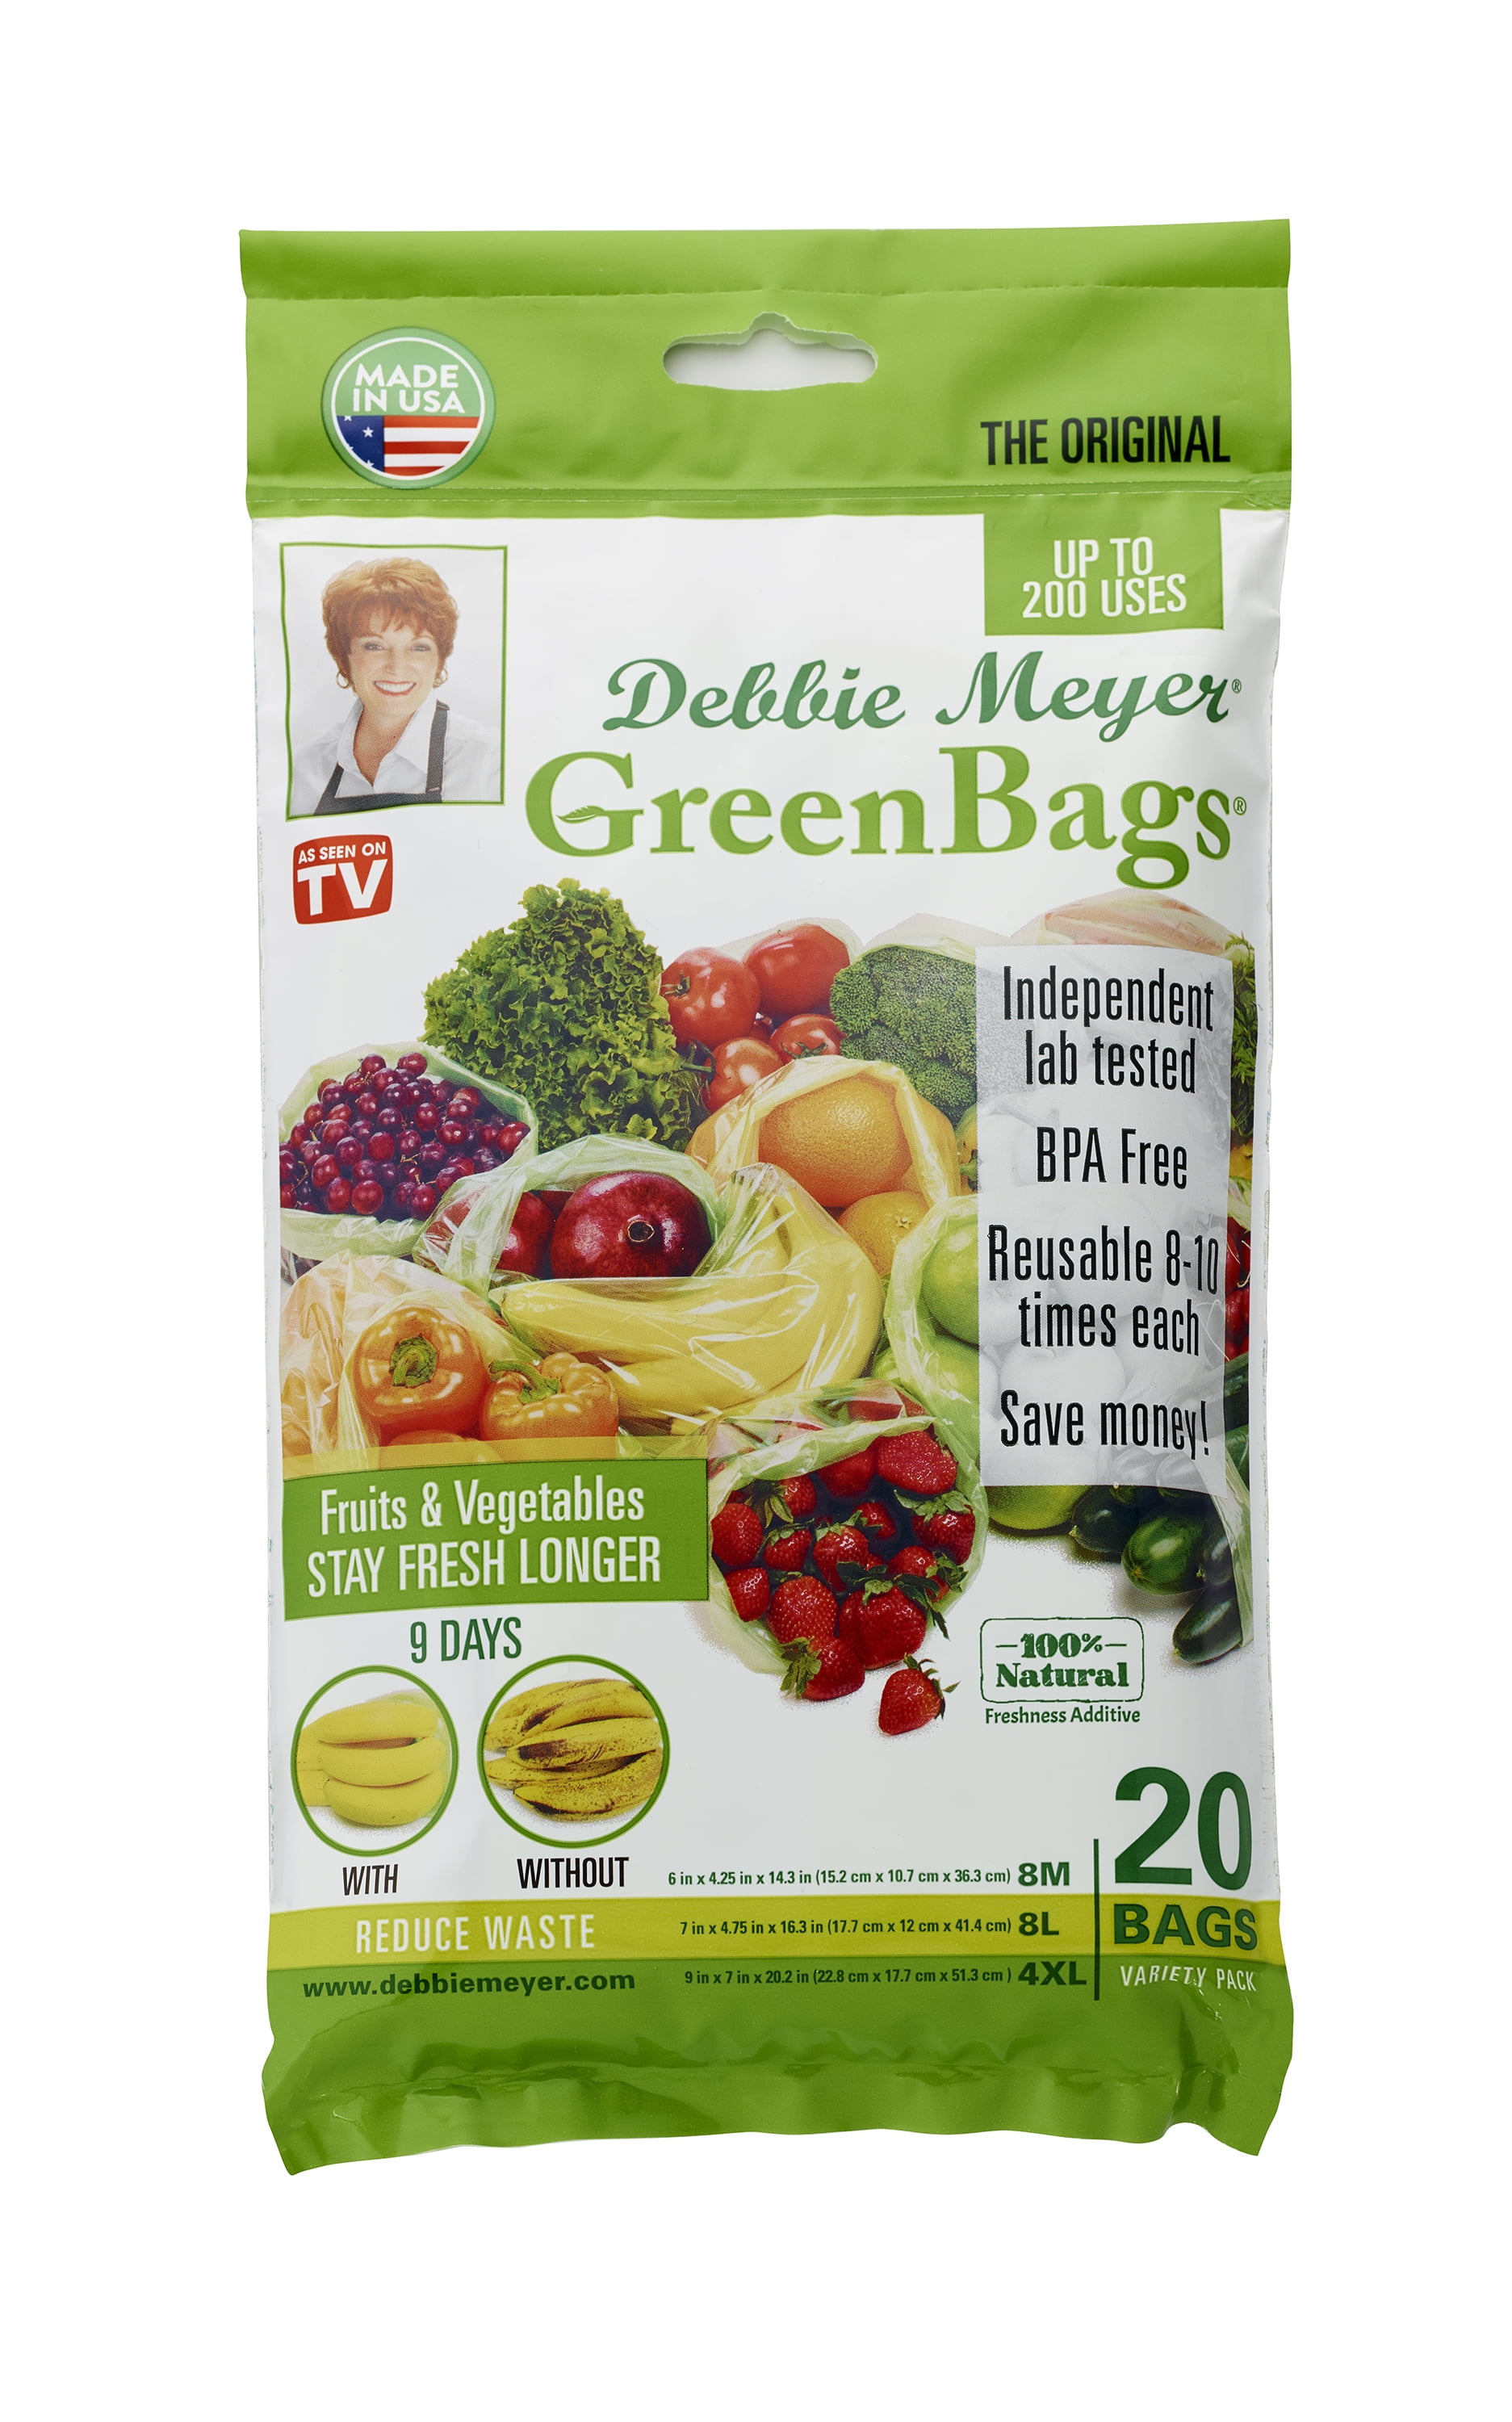 Green Bags Reusable BPA Free Food Storage Bags 20 pc Variety Pack 8M/8L/4XL Sets 